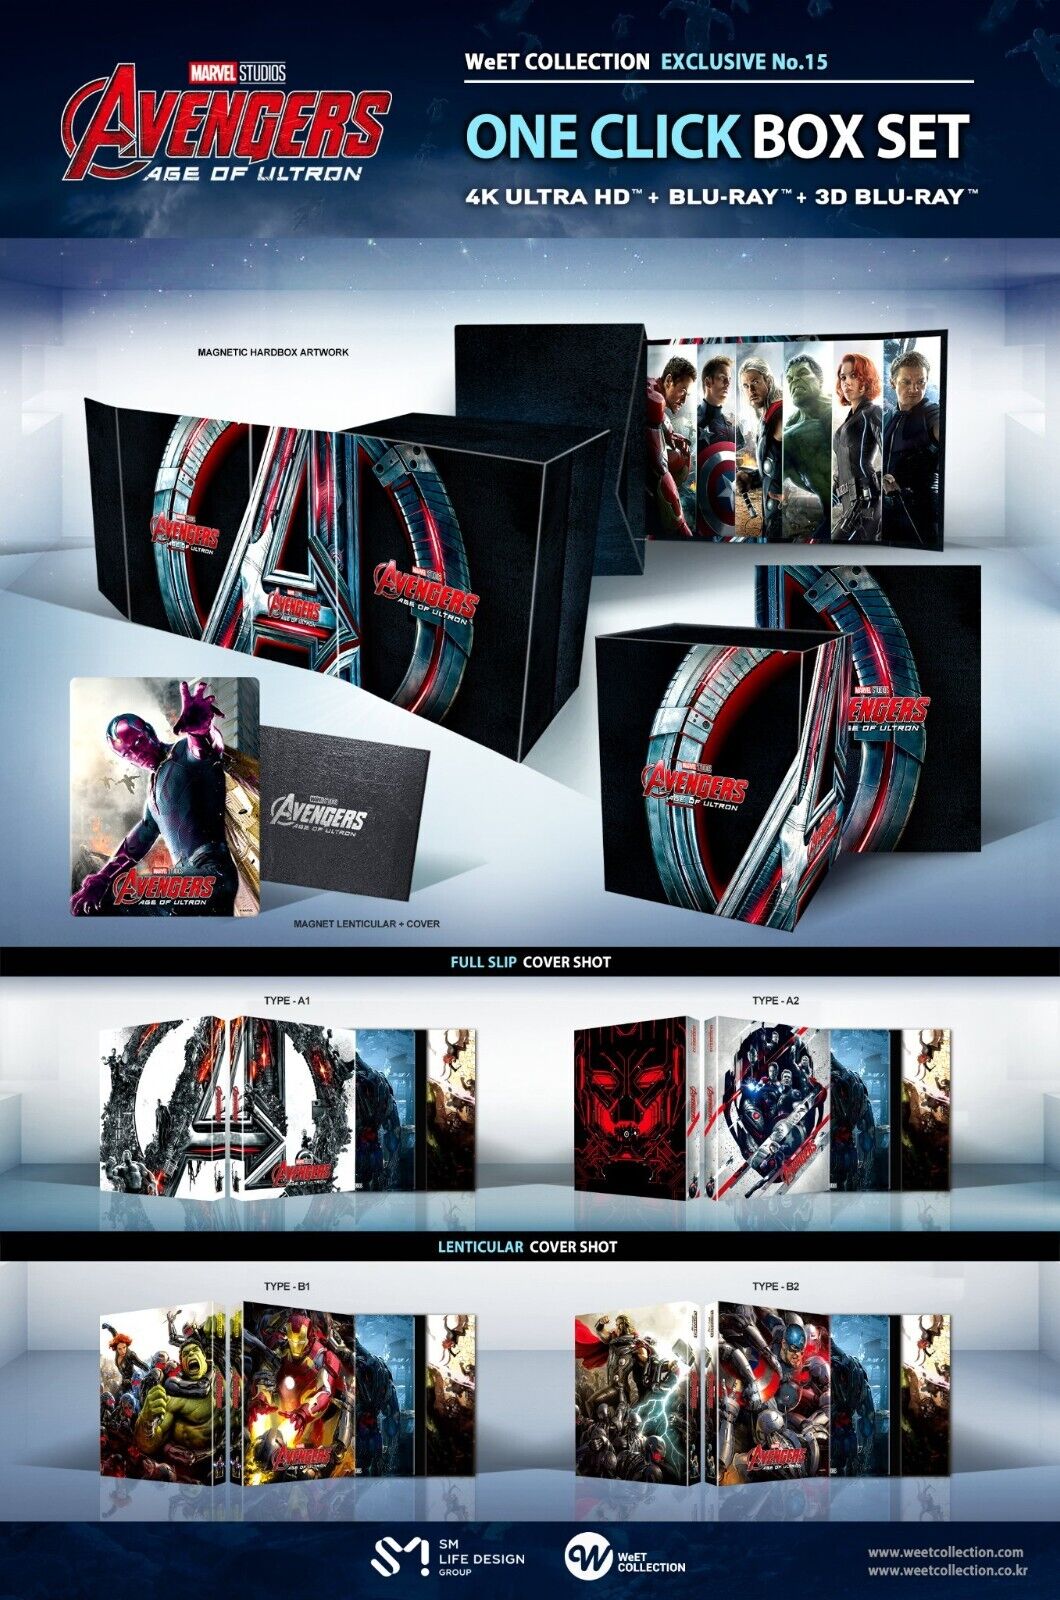 Avengers: Age of Ultron 4K+2D+3D Blu-ray SteelBook WeET Collection Exclusive #15 One Click Box Set